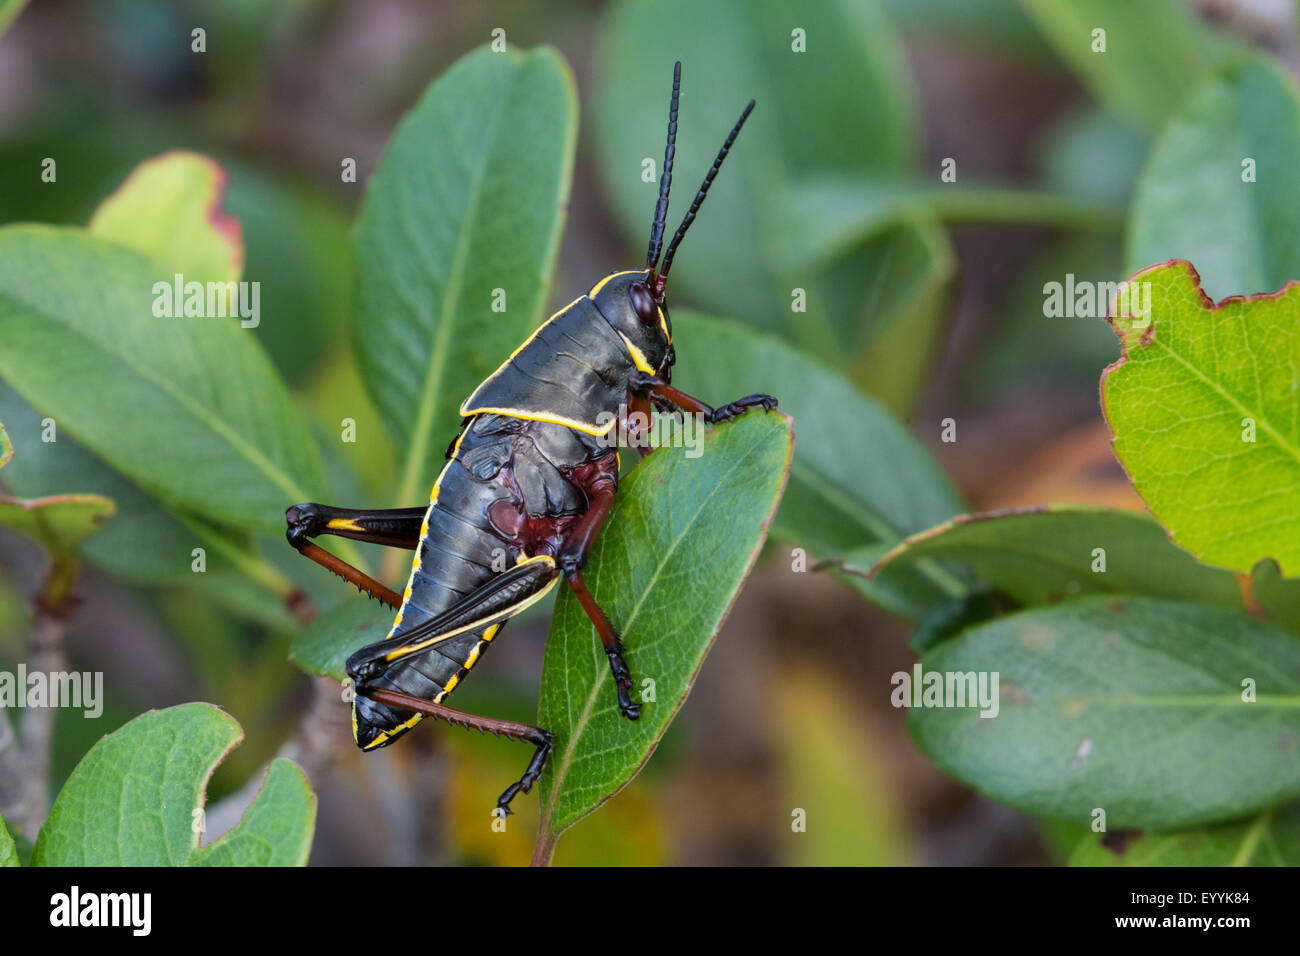 Eastern lubber grasshopper (Romalea microptera), nymphe, USA, Floride Banque D'Images